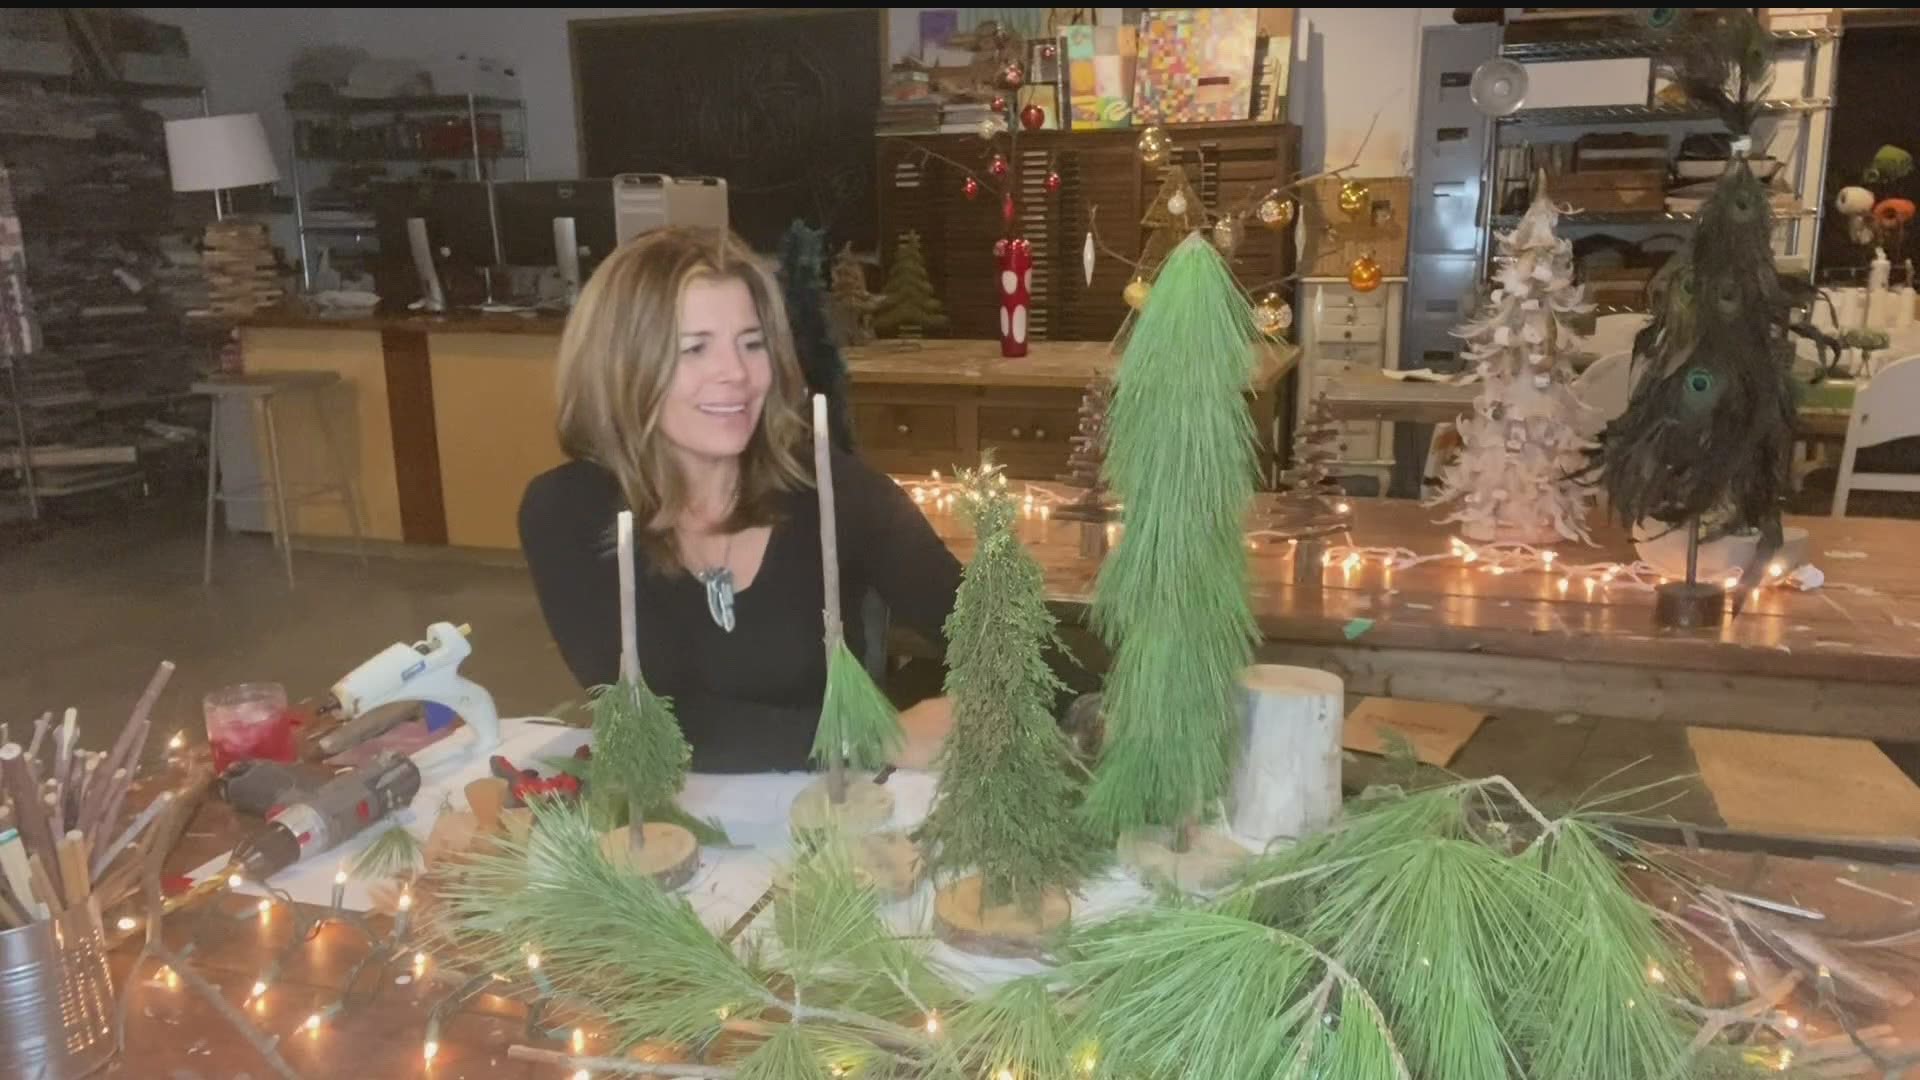 Michele creates festive trees with natural materials this morning on 'Iowa Live'